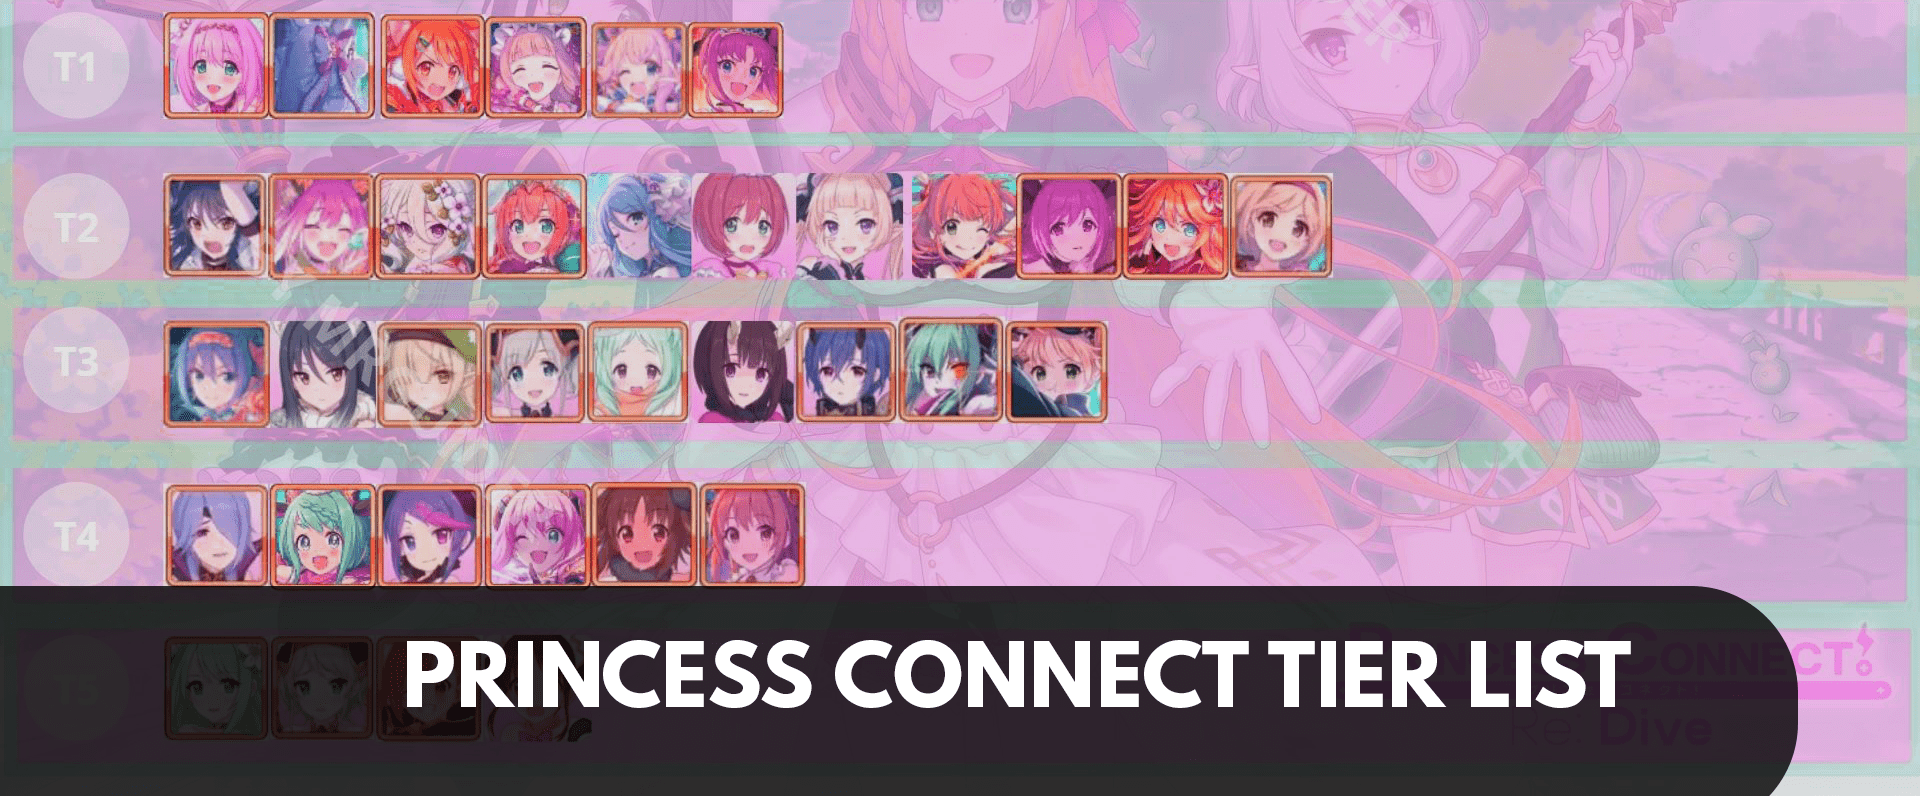 Princess connect tier list. All about its characters